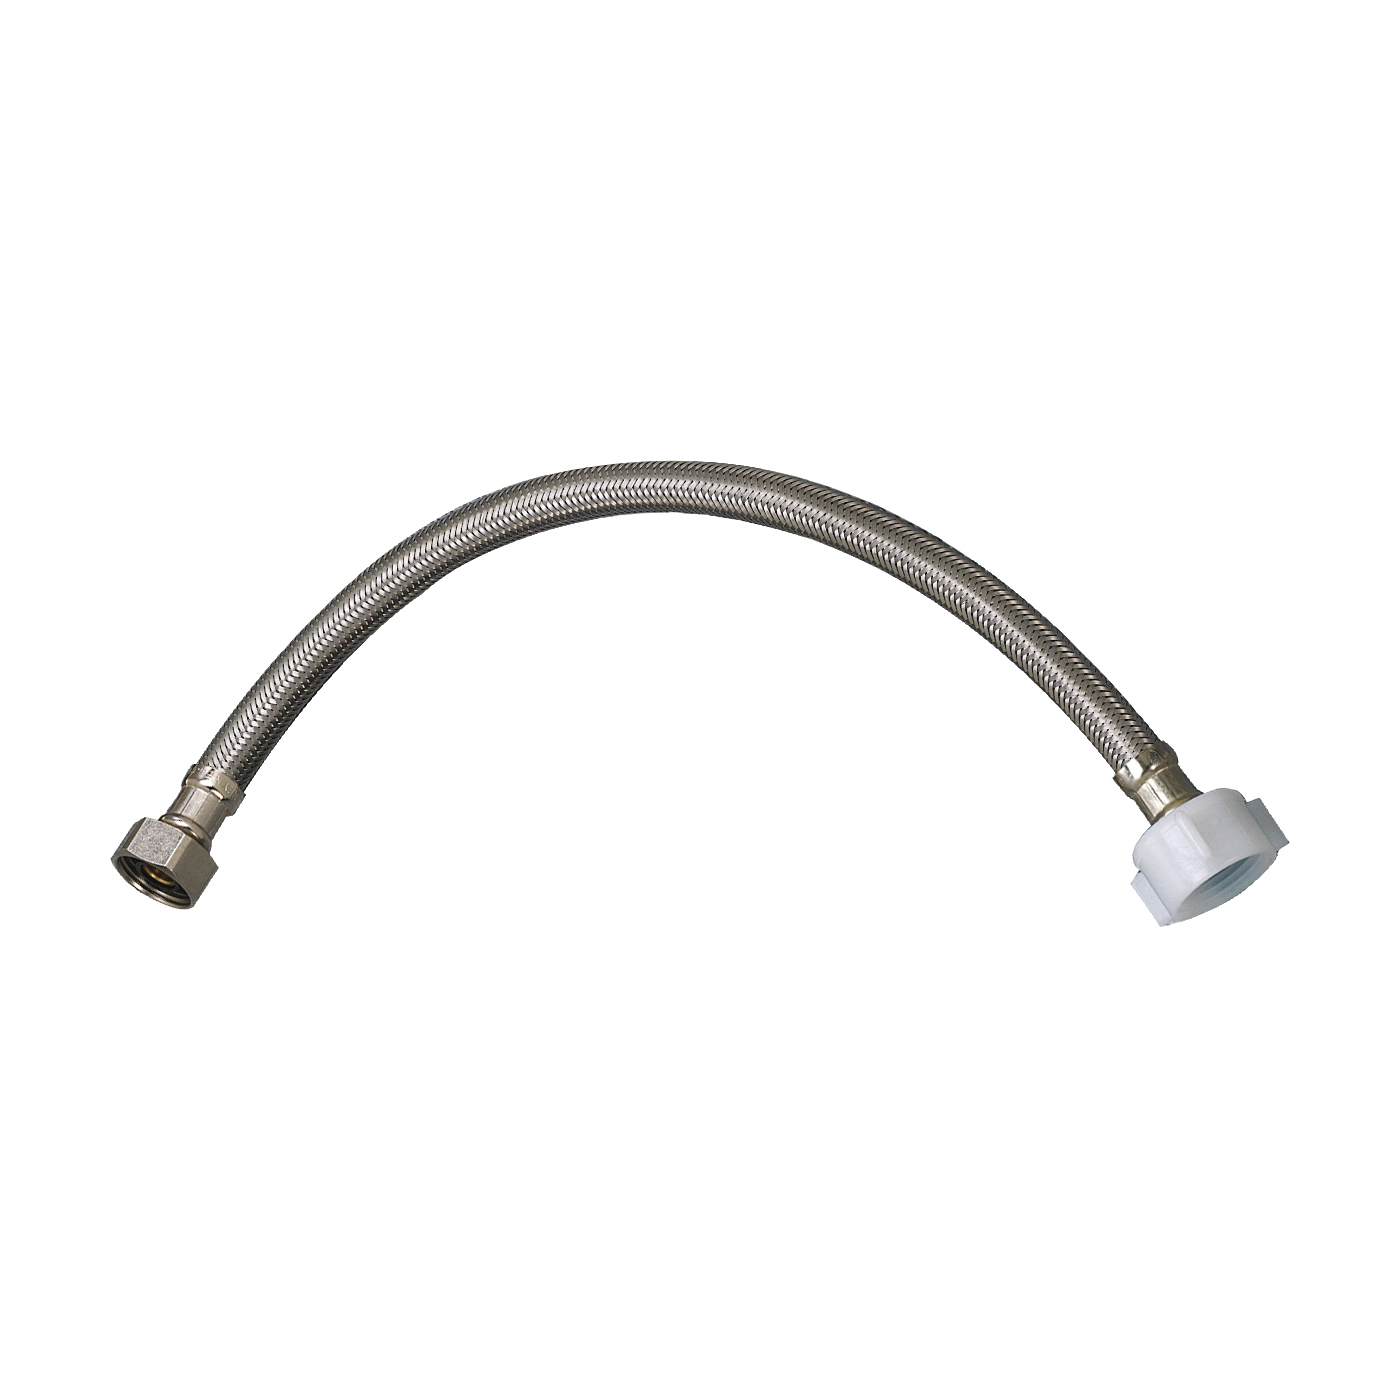 EZ Series PP23856 Toilet Supply Tube, 1/2 in Inlet, Flare Inlet, 7/8 in Outlet, Ballcock Outlet, Stainless Steel, 12 in L